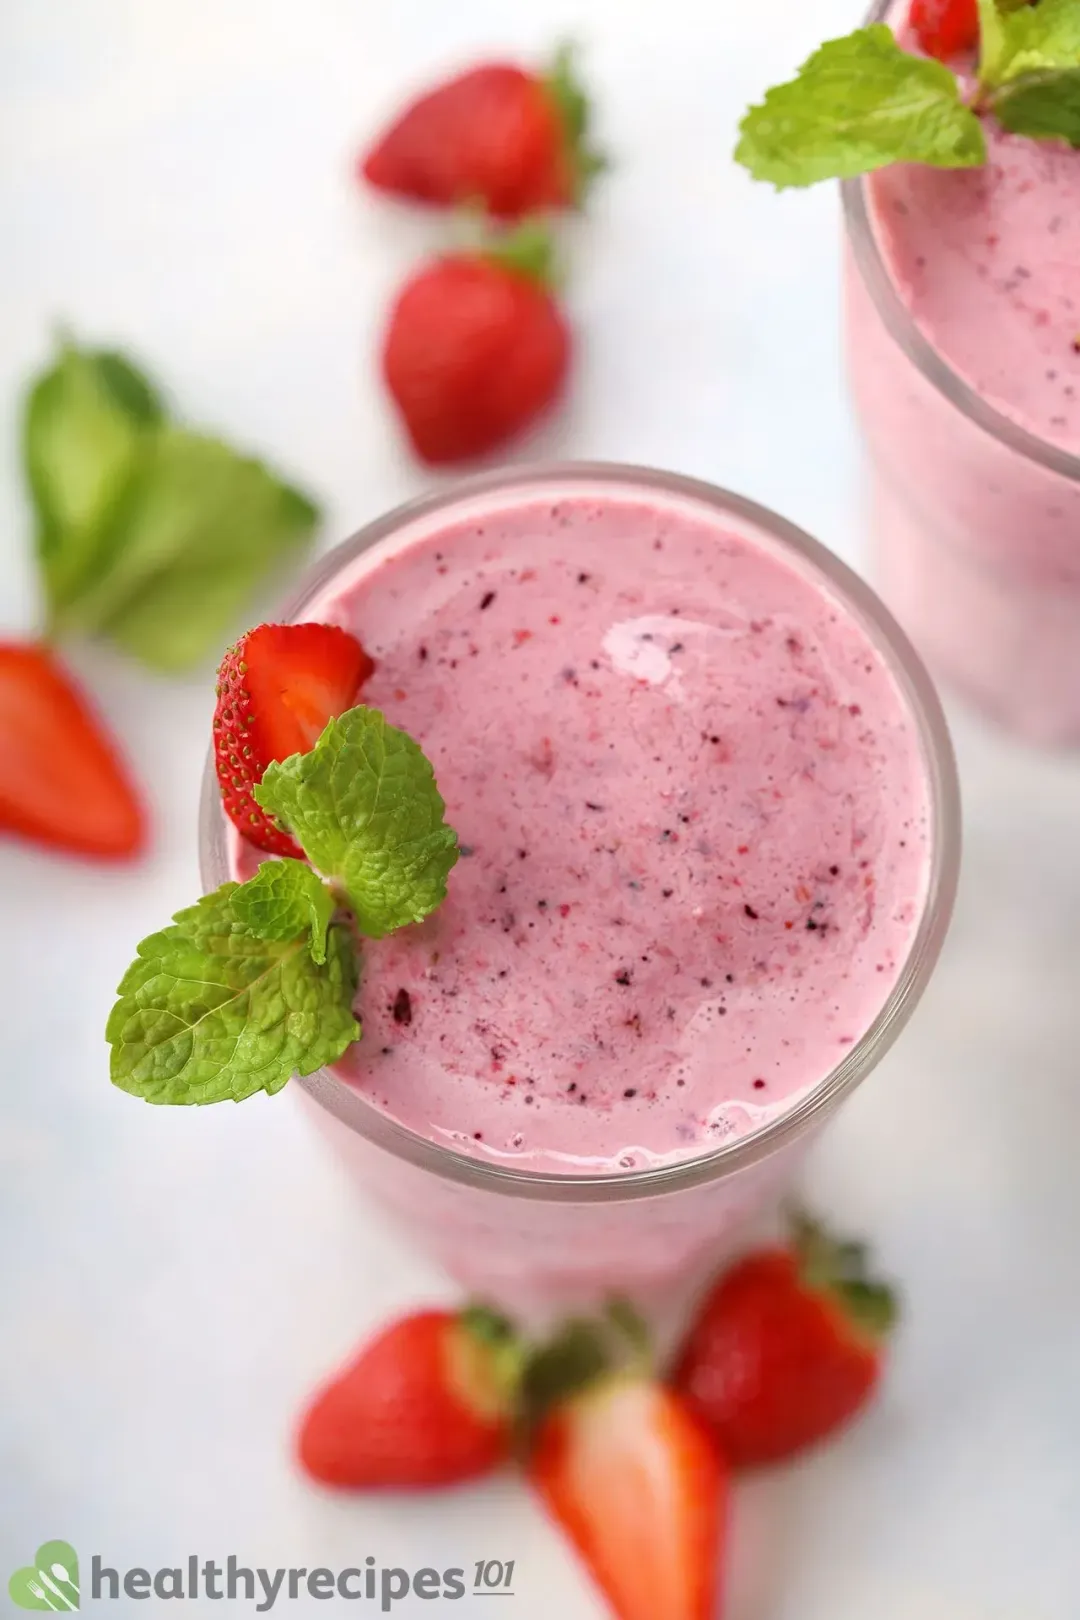 Benefits of Blueberries in Strawberry Blueberry Smoothie